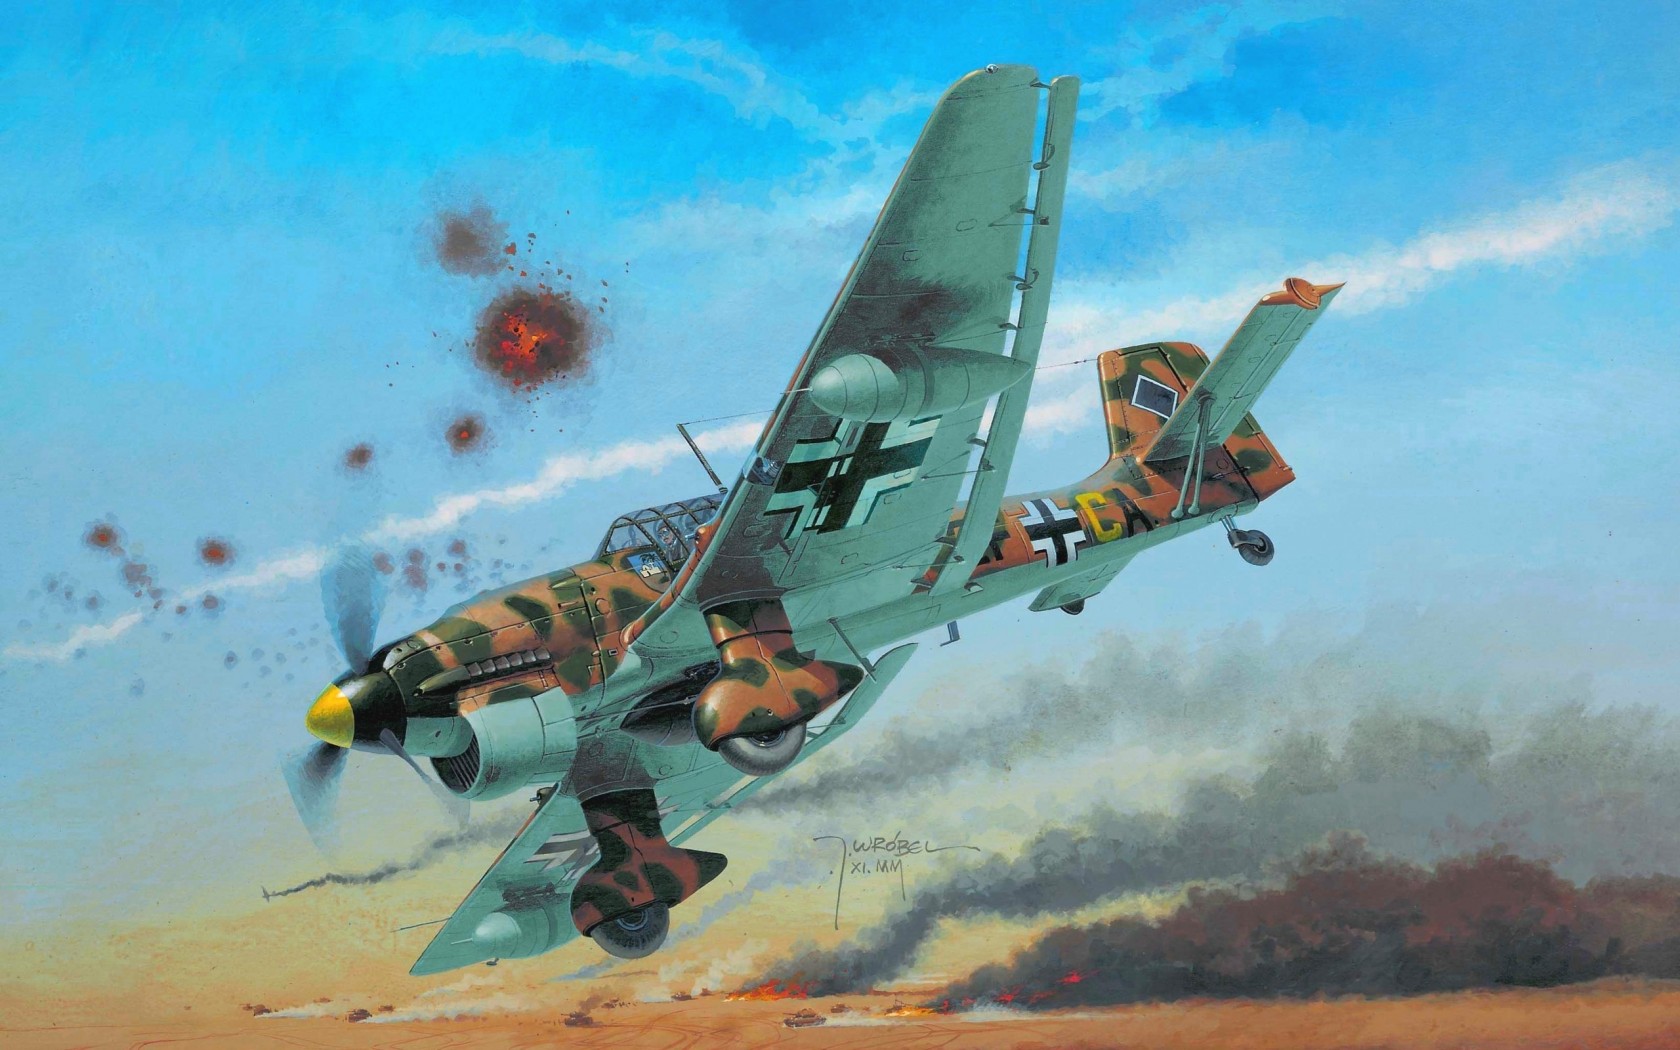 World War Ii Military Military Aircraft Aircraft Airplane Luftwaffe Germany Junkers Bomber Dive Bomb 1680x1050